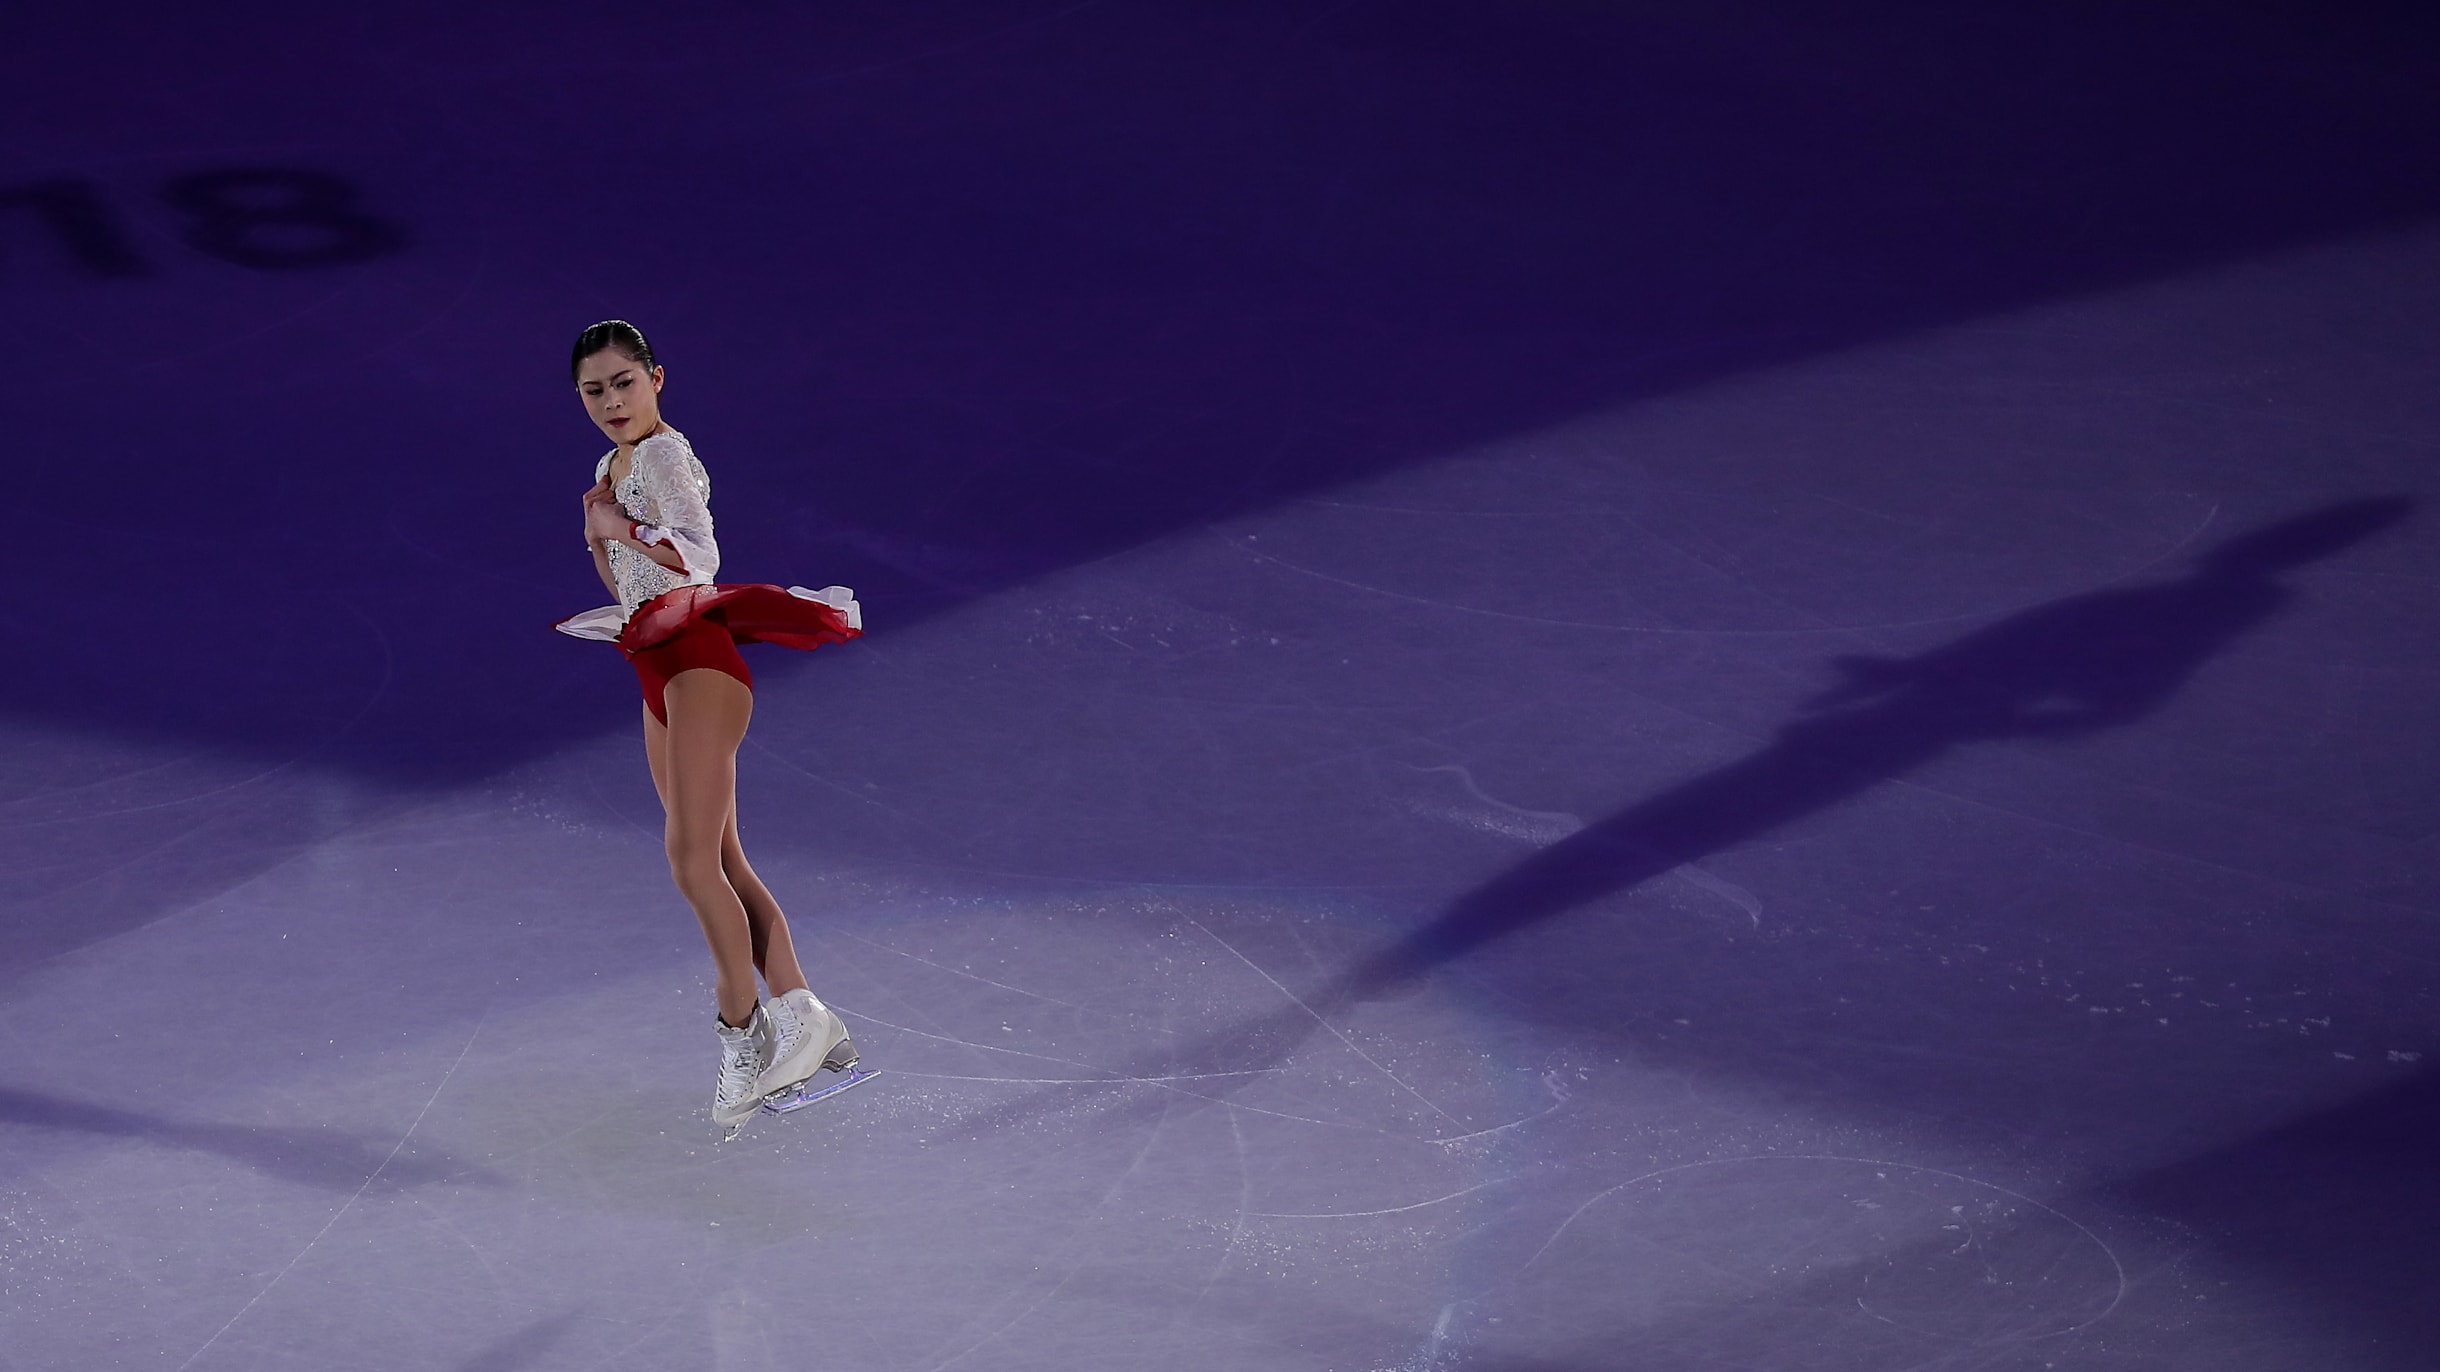 The jumps, spins and turns of figure skating